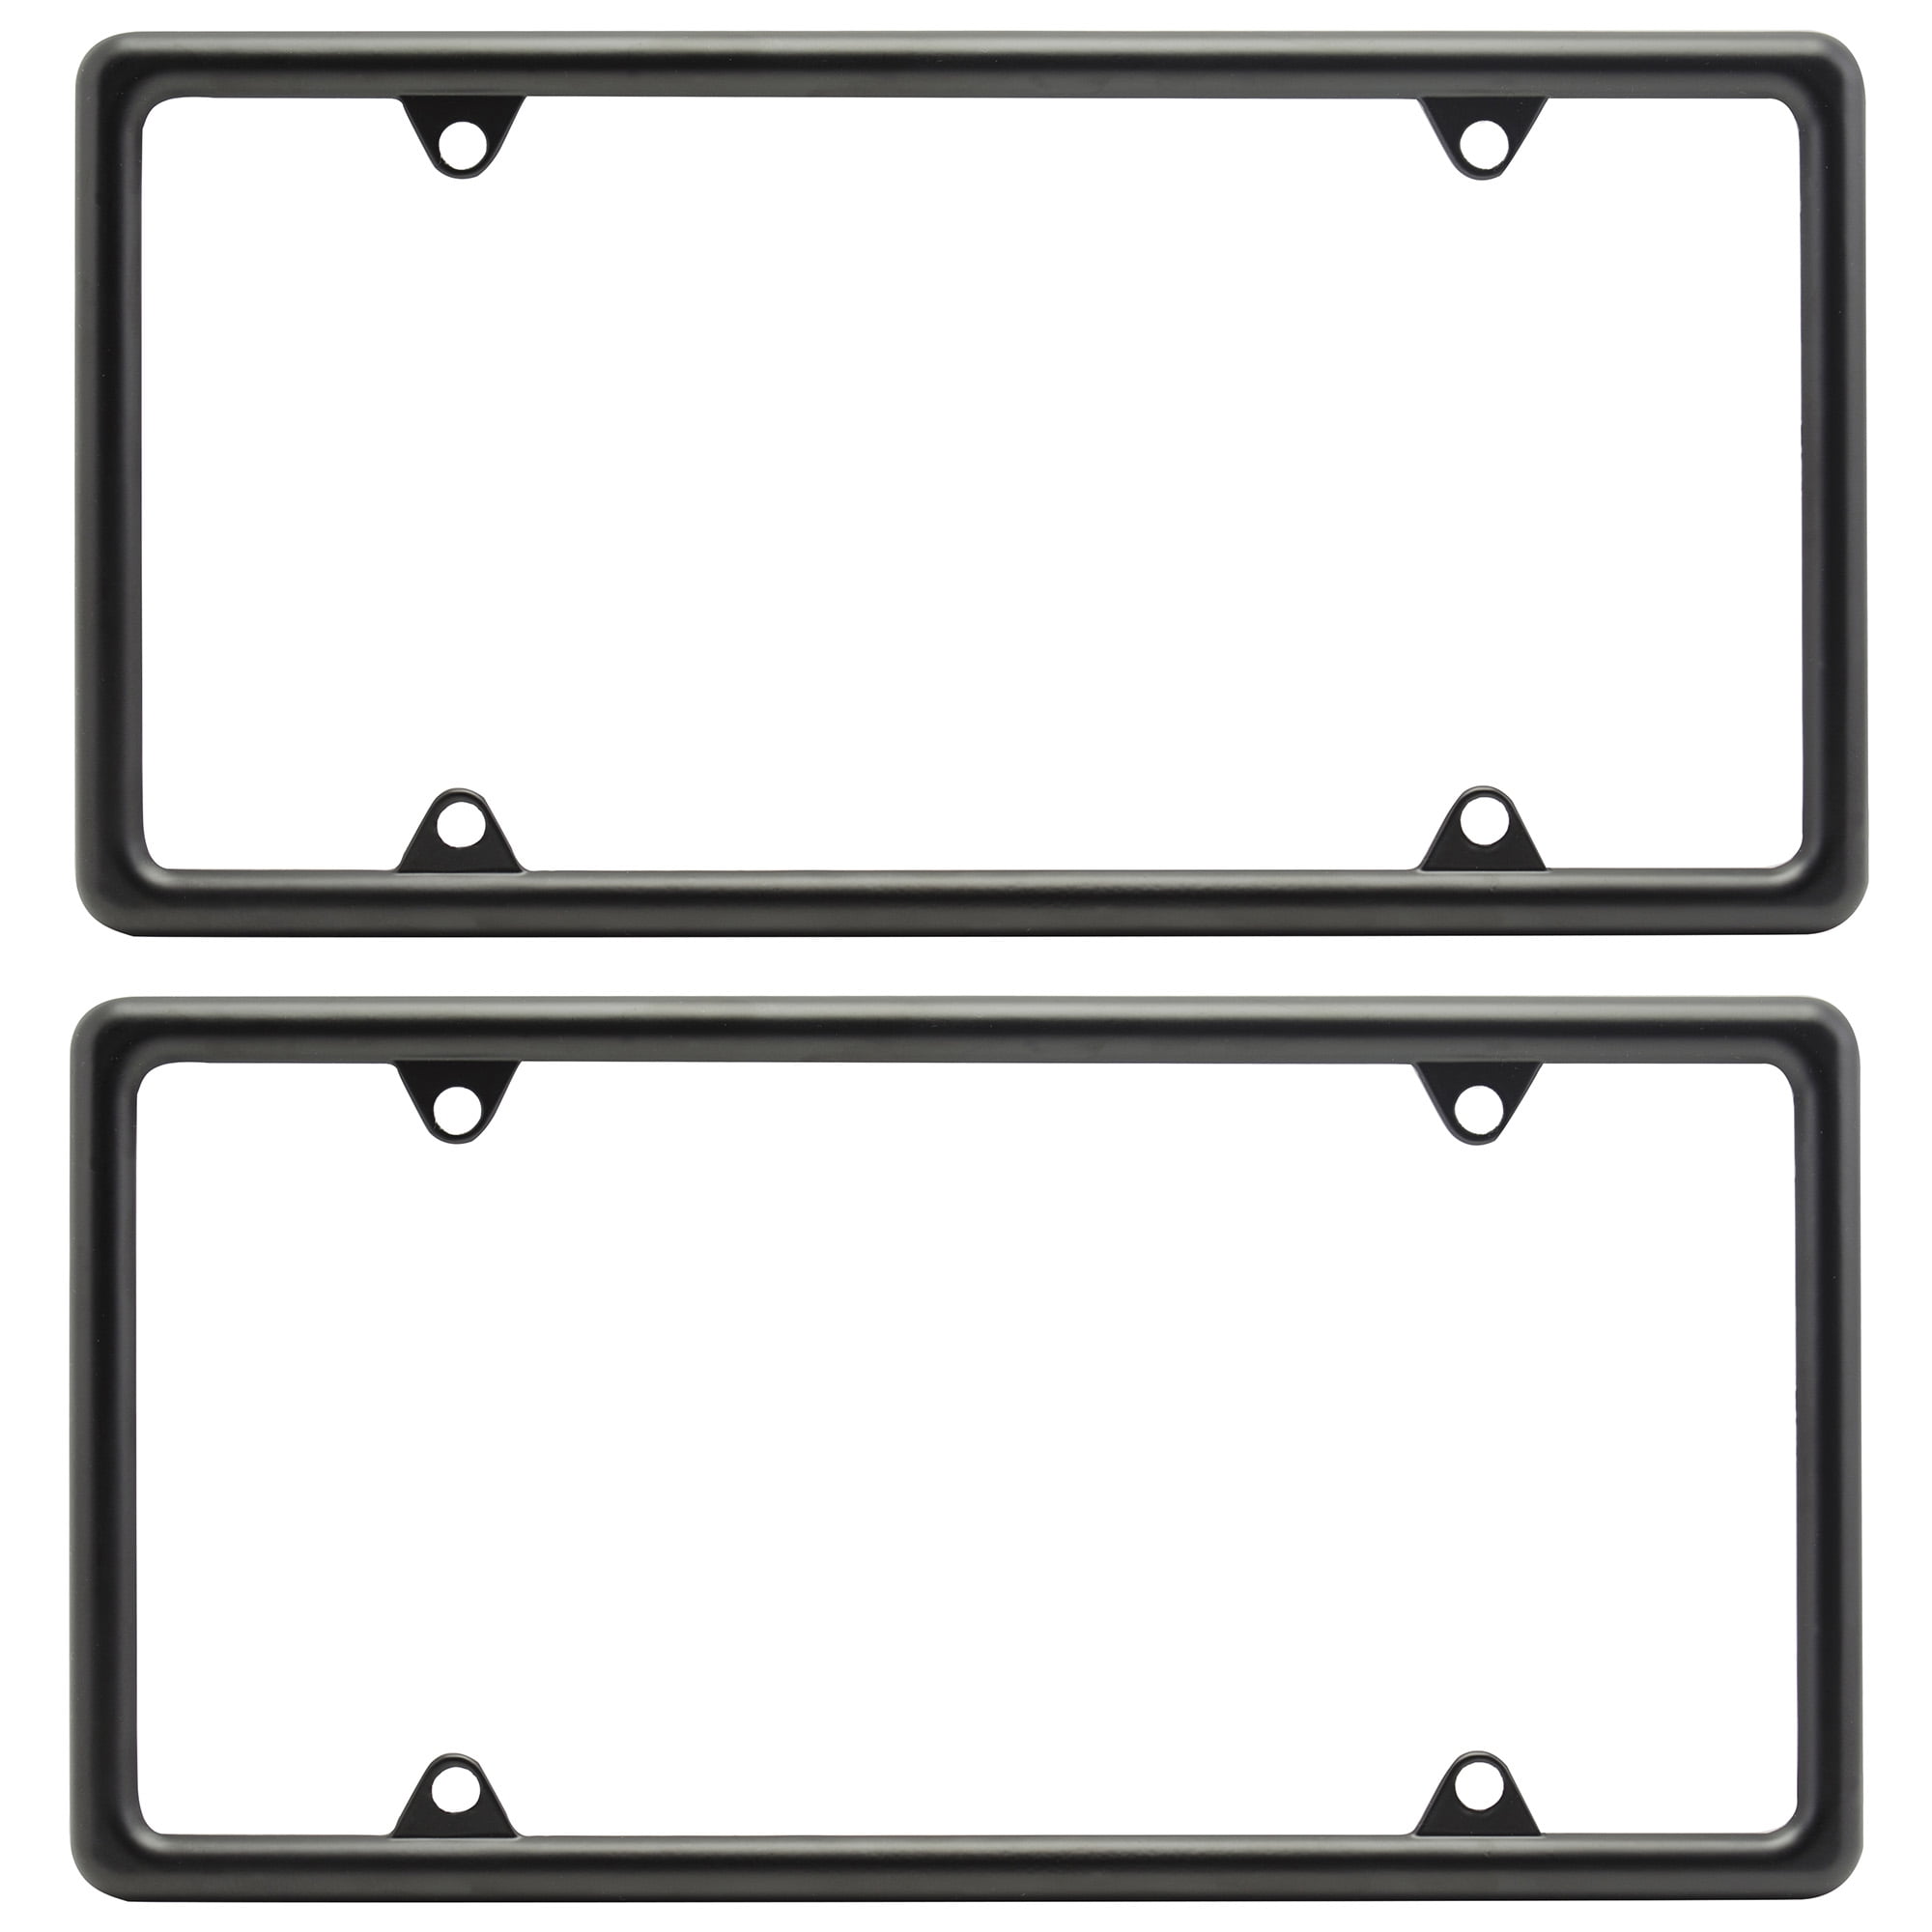 License Plates Frames Truck Car Silicone Protector black US License Plates Cover 